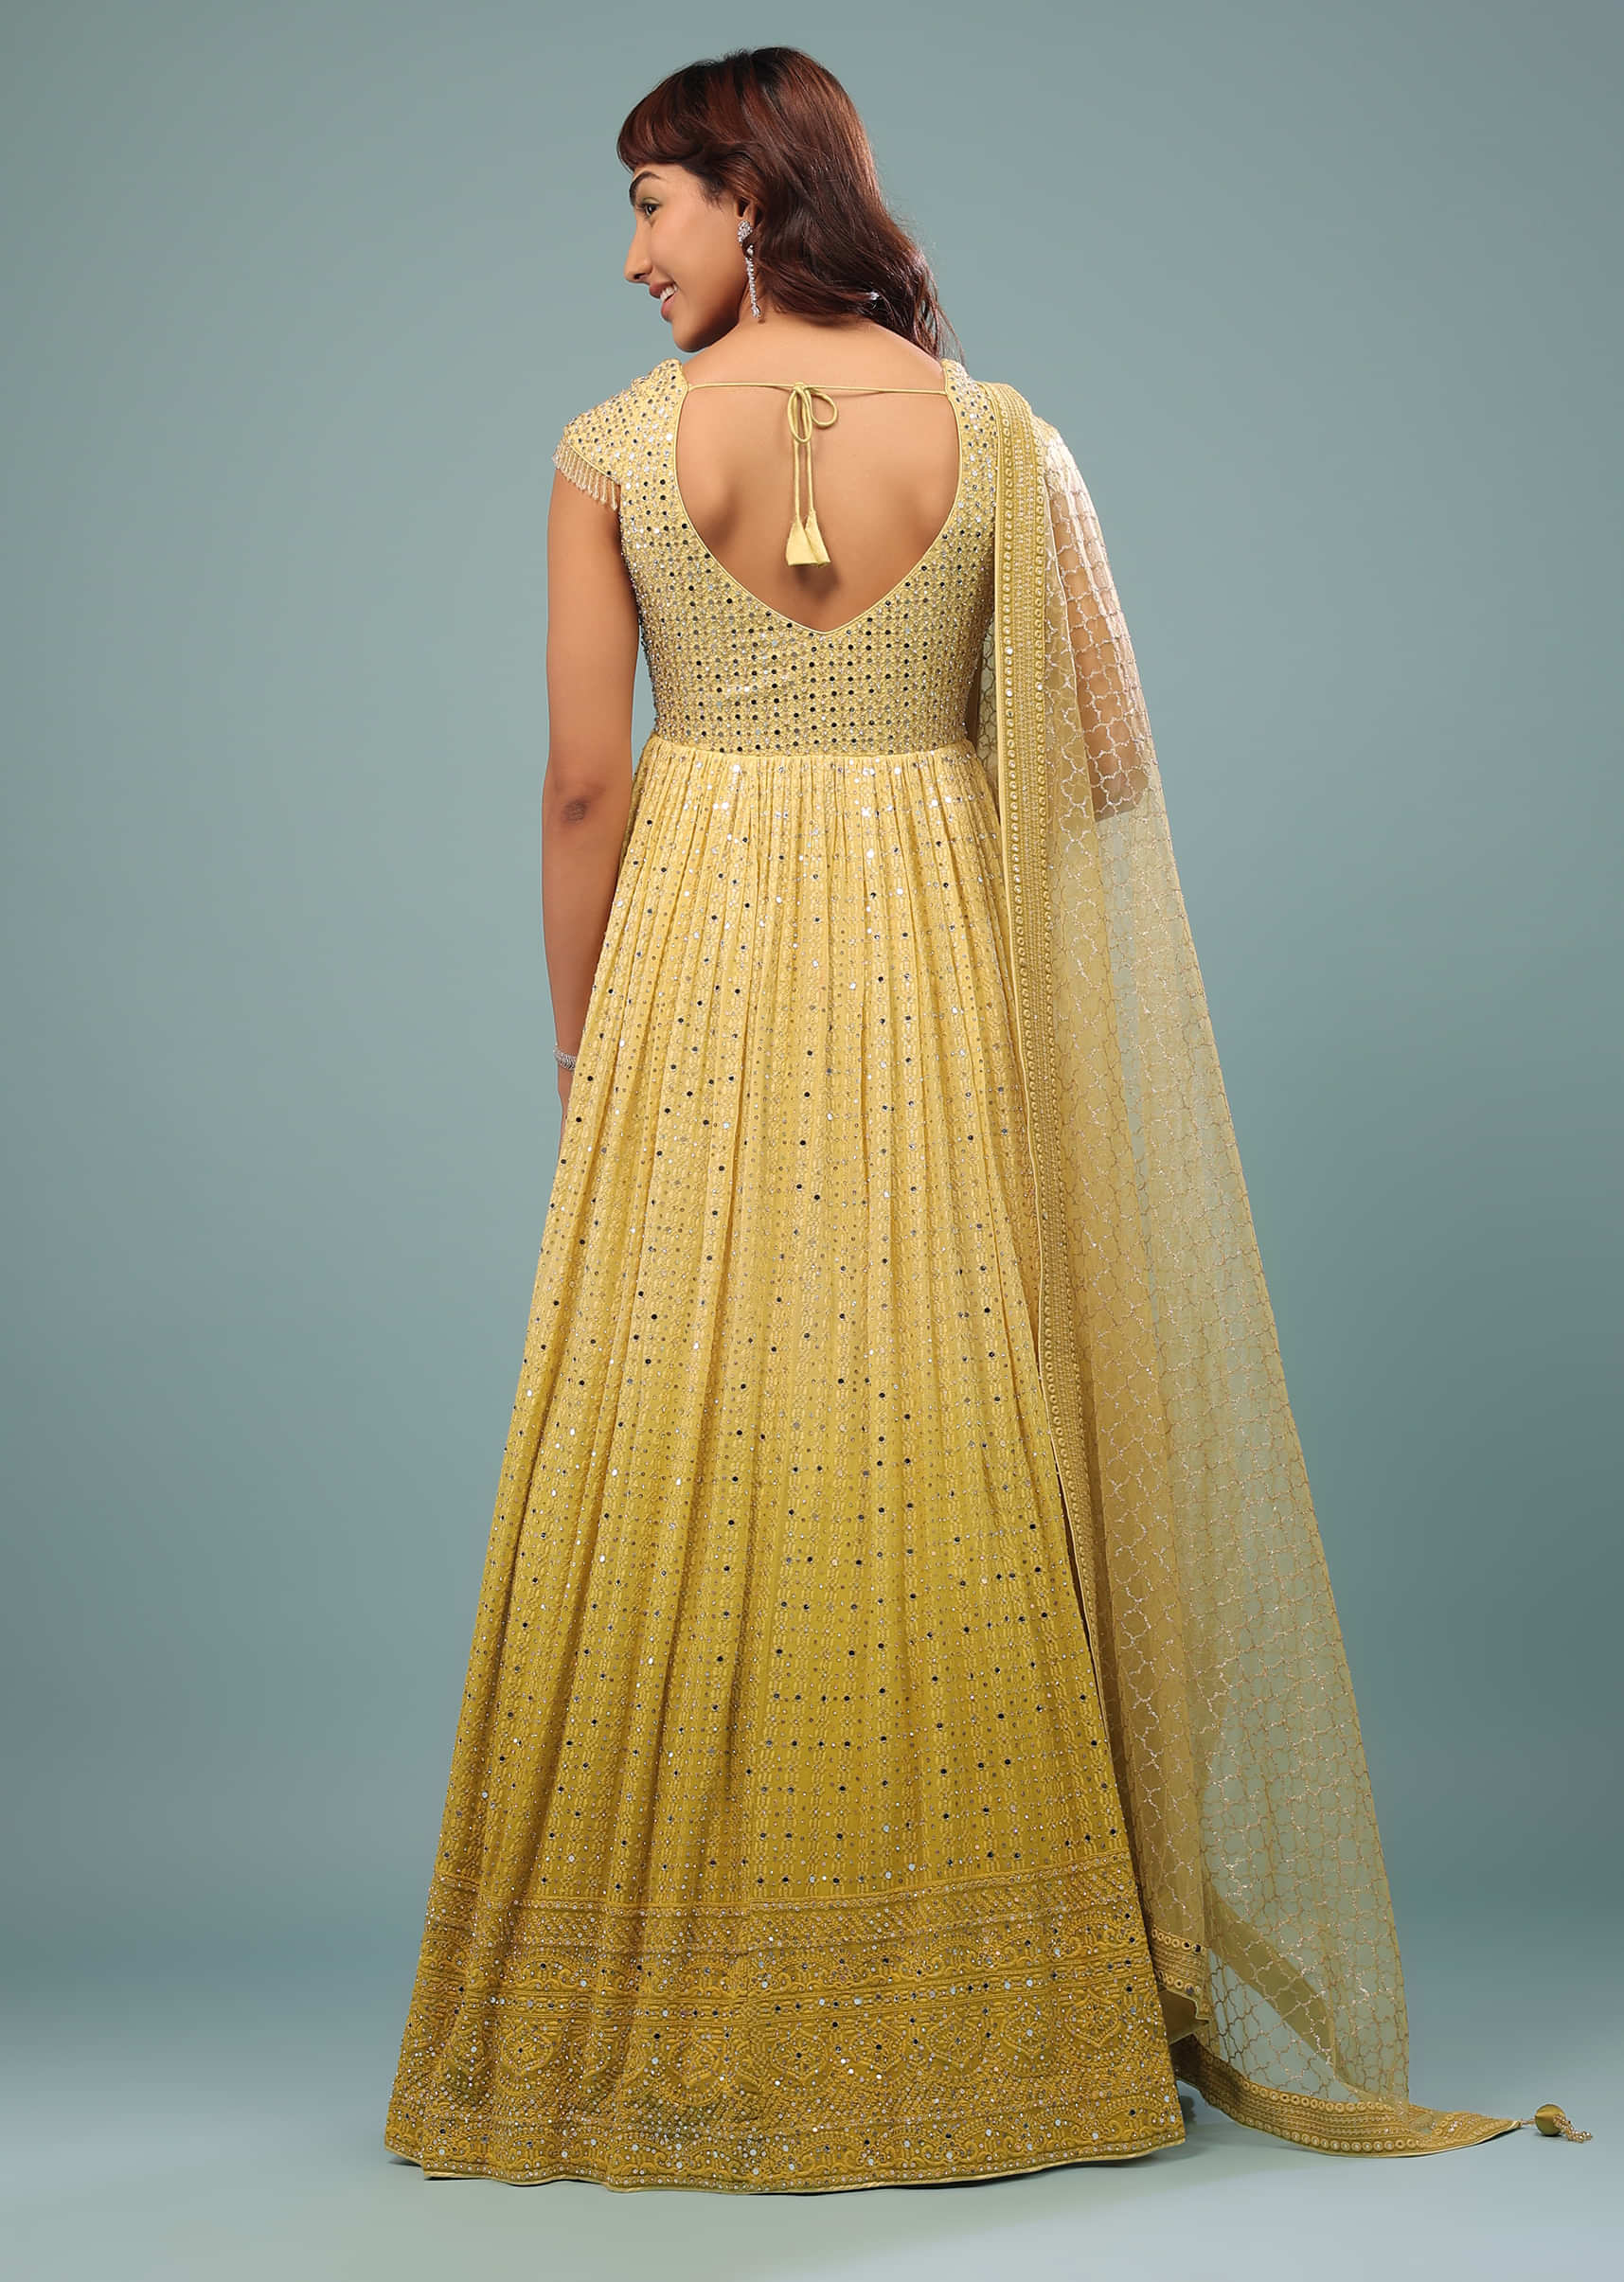 Daffodil Yellow Ombre Embroidered Anarkali Suit Set In Georgette